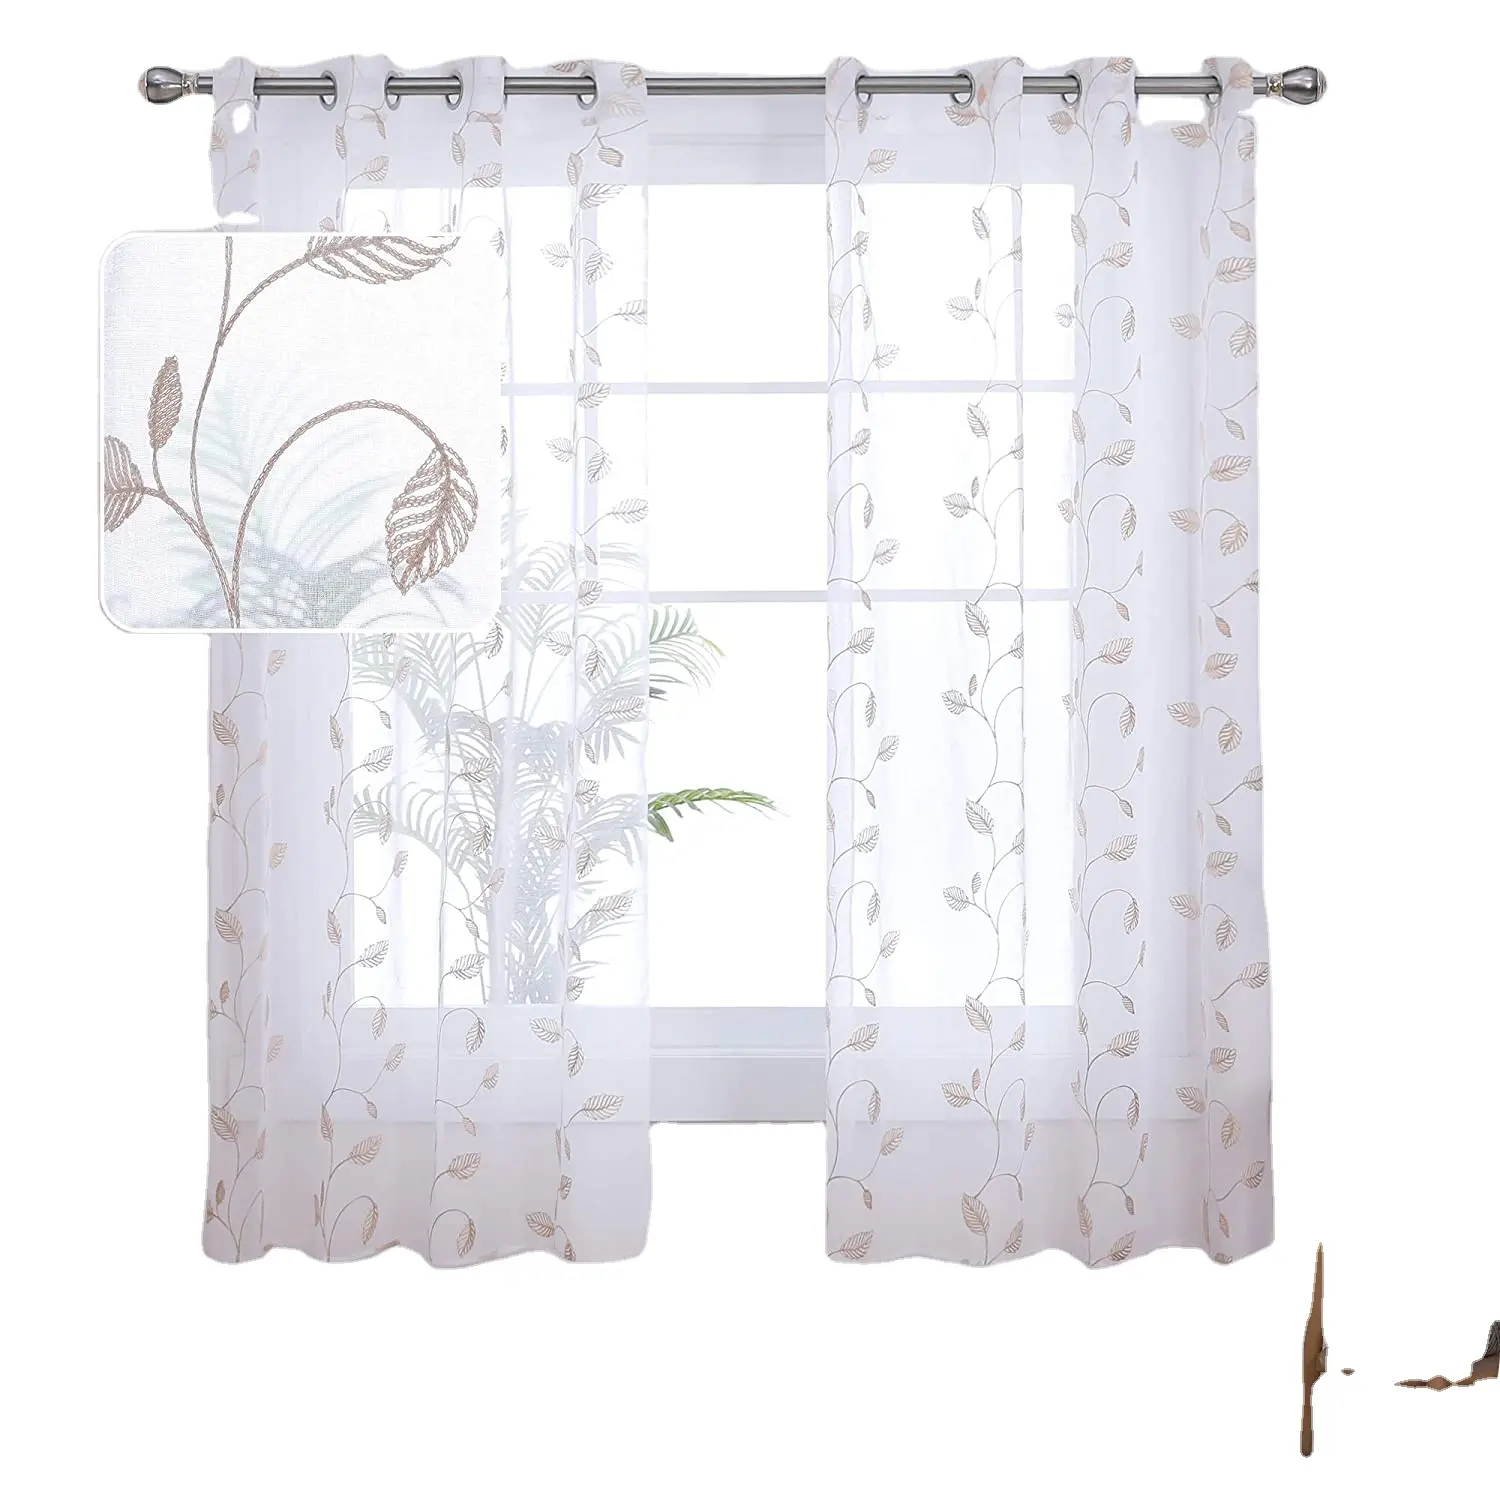 Short Curtain Lace Decorative Bathroom Lace Decorative Curtain for Kitchen Cafe Small Half Window Curtains